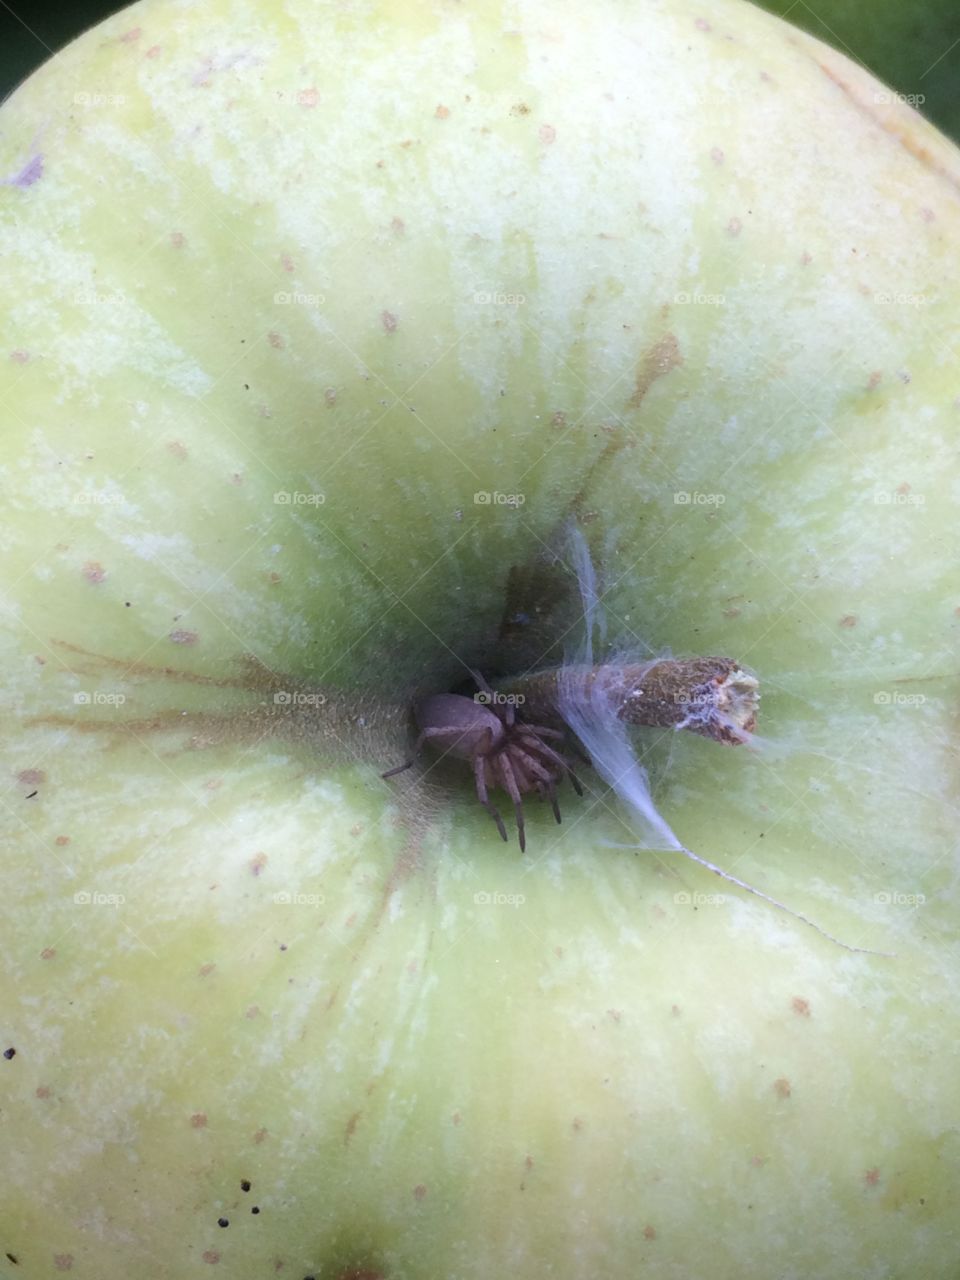 Spider on an apple.